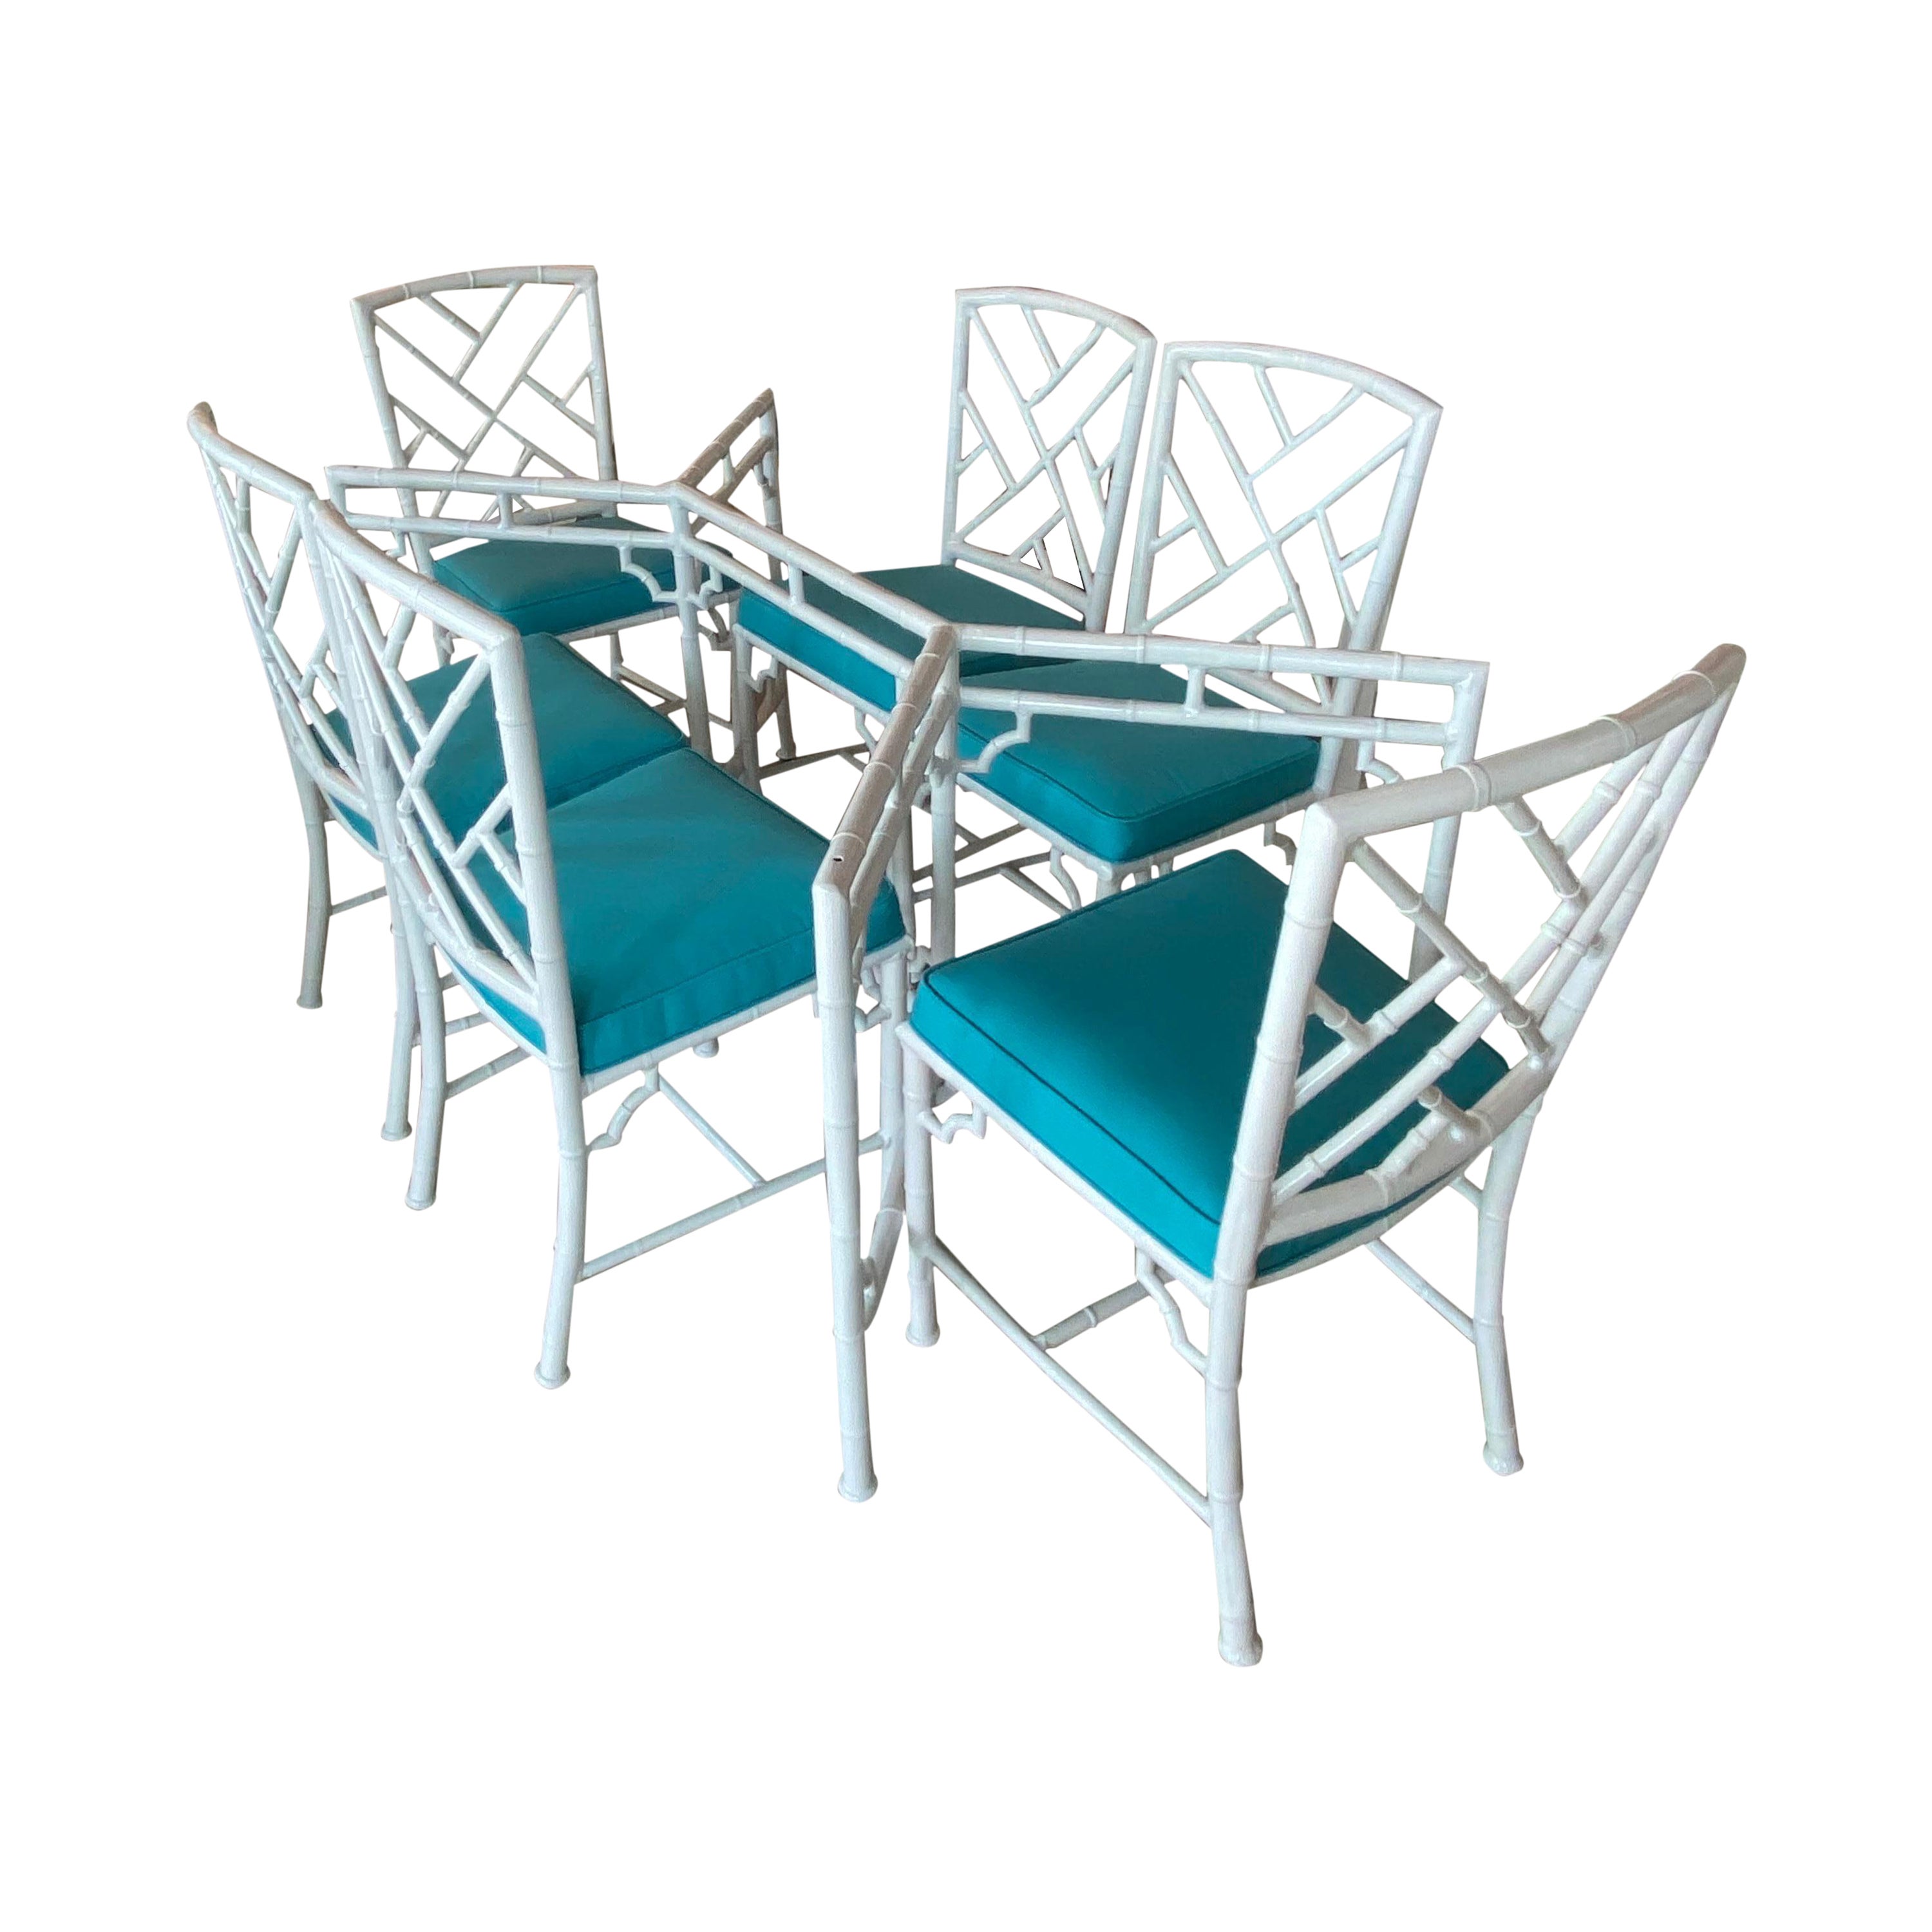 Details about   Set of 4 Vintage Faux Bamboo Metal Cafe Patio Garden Chairs 